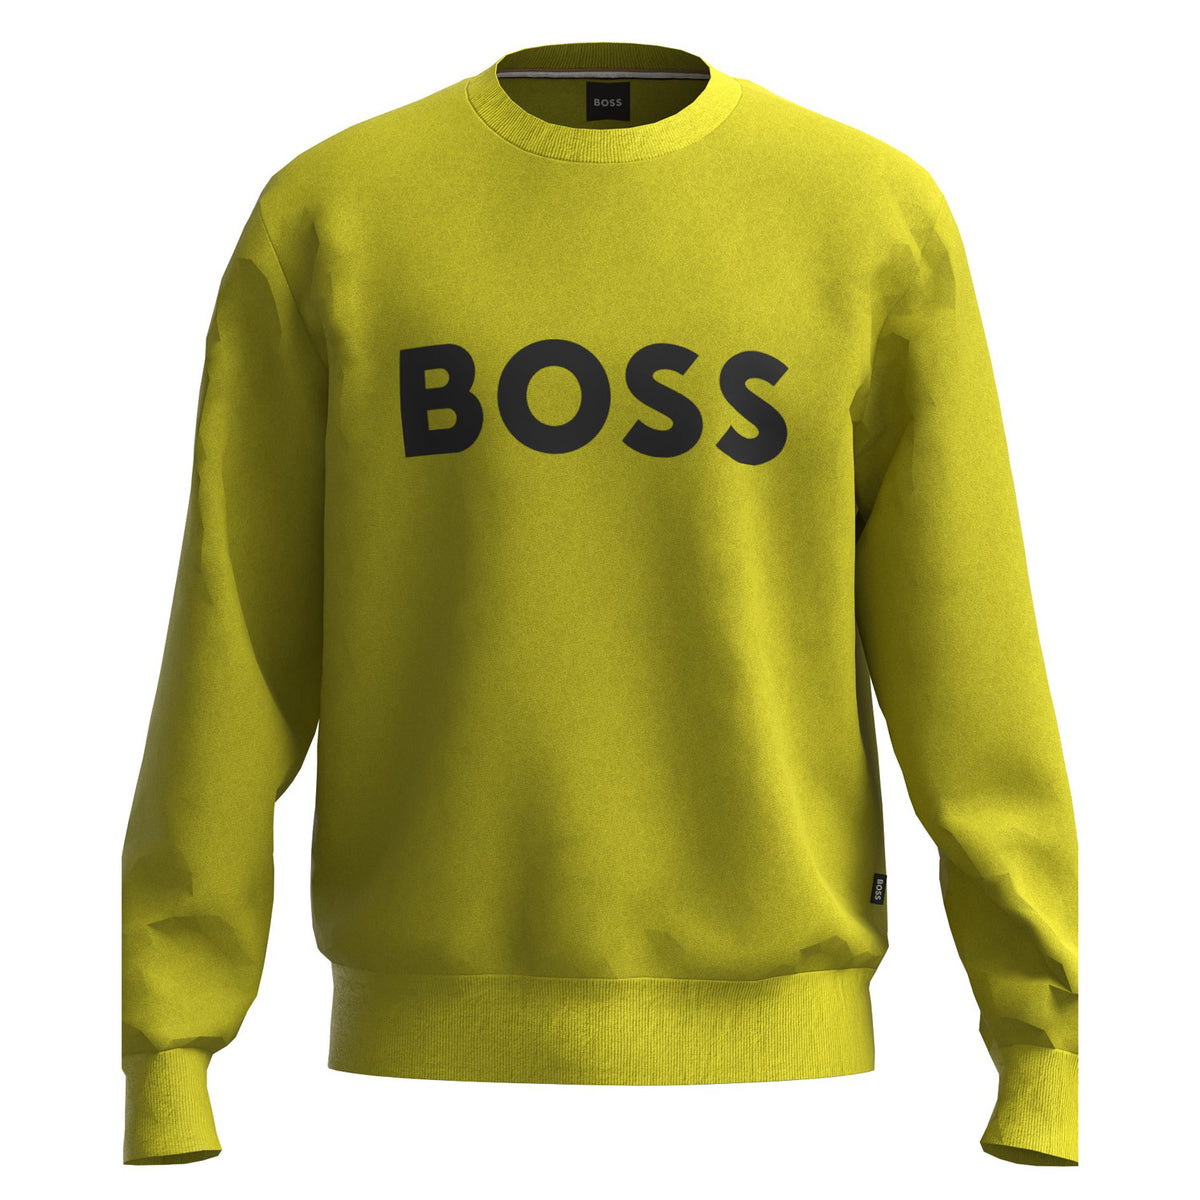 Pure cotton relaxed-fit sweatshirt swith boss logo branding